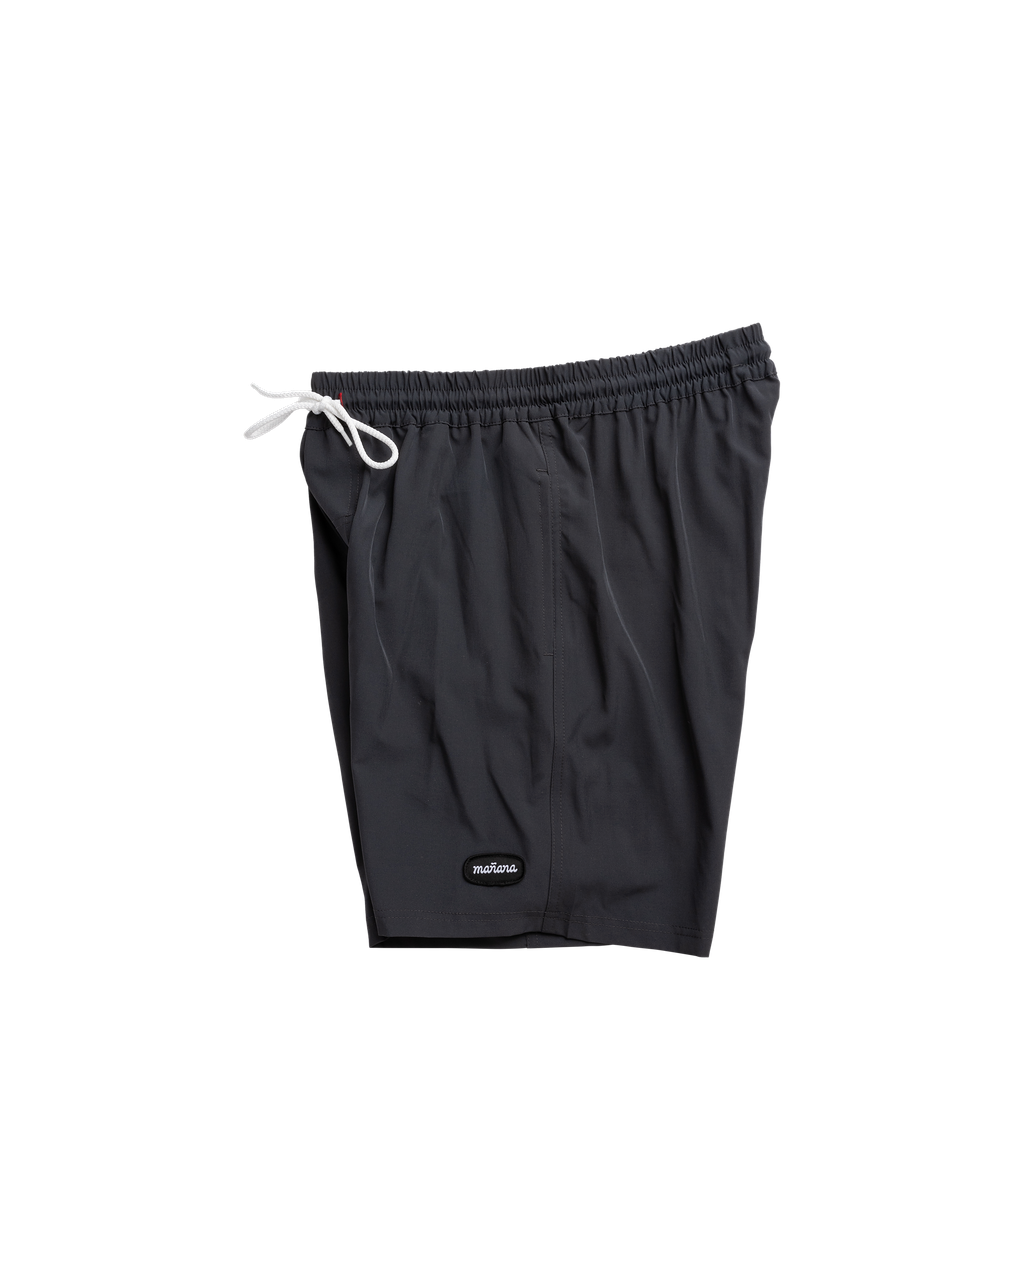 Volley Short - Charcoal